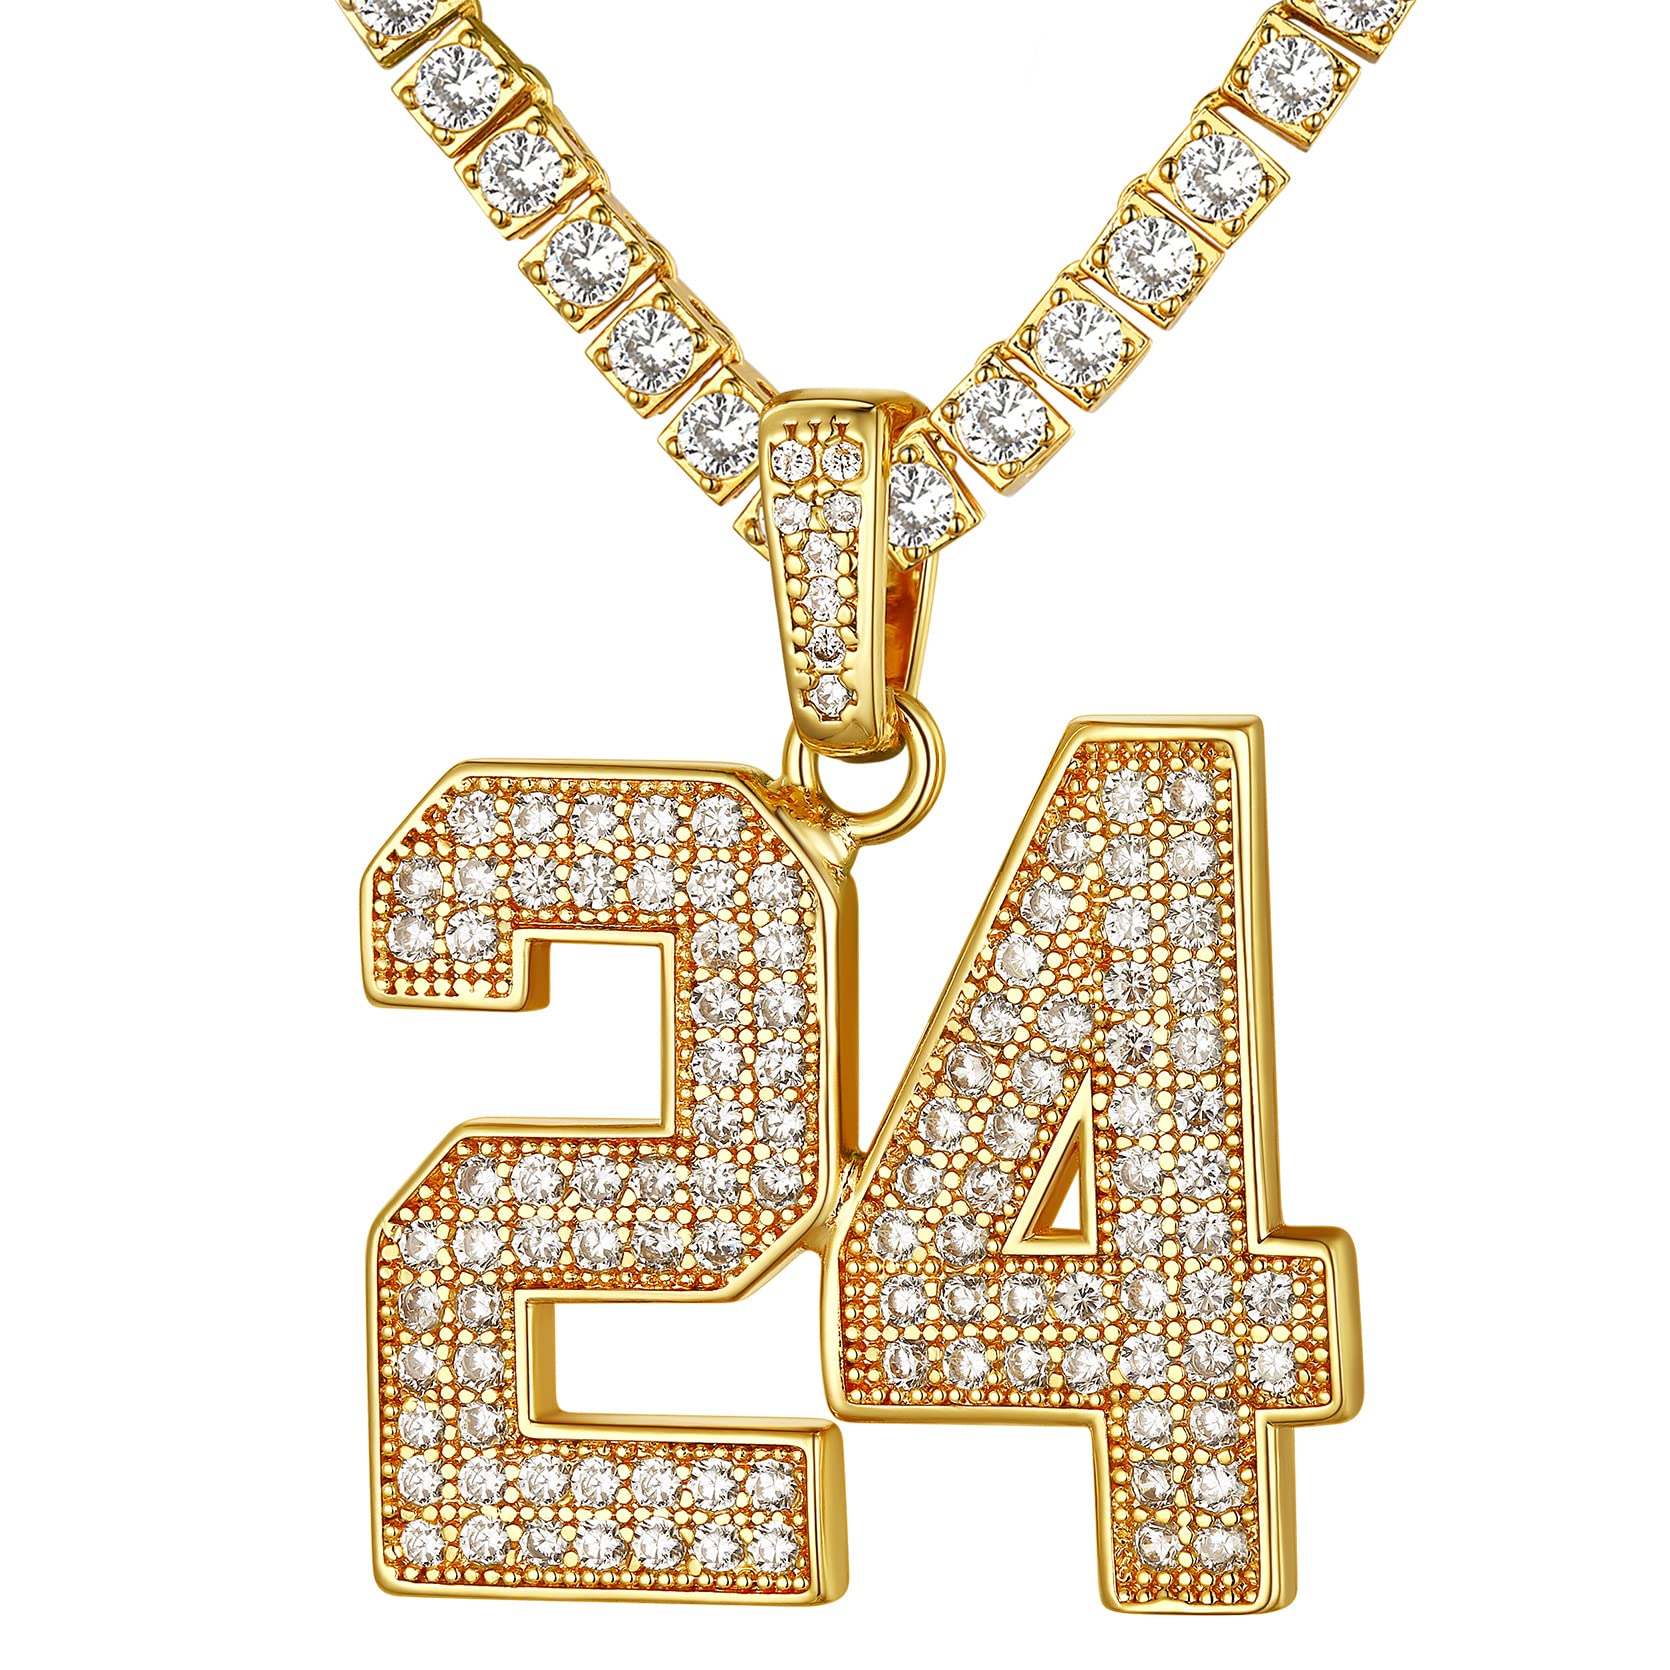 KeyStyle Number Necklaces For Men, Bling Numbers Chain Necklace Hip Hop Simulated Diamond Pendant with Tennis Chain Spiga Chains